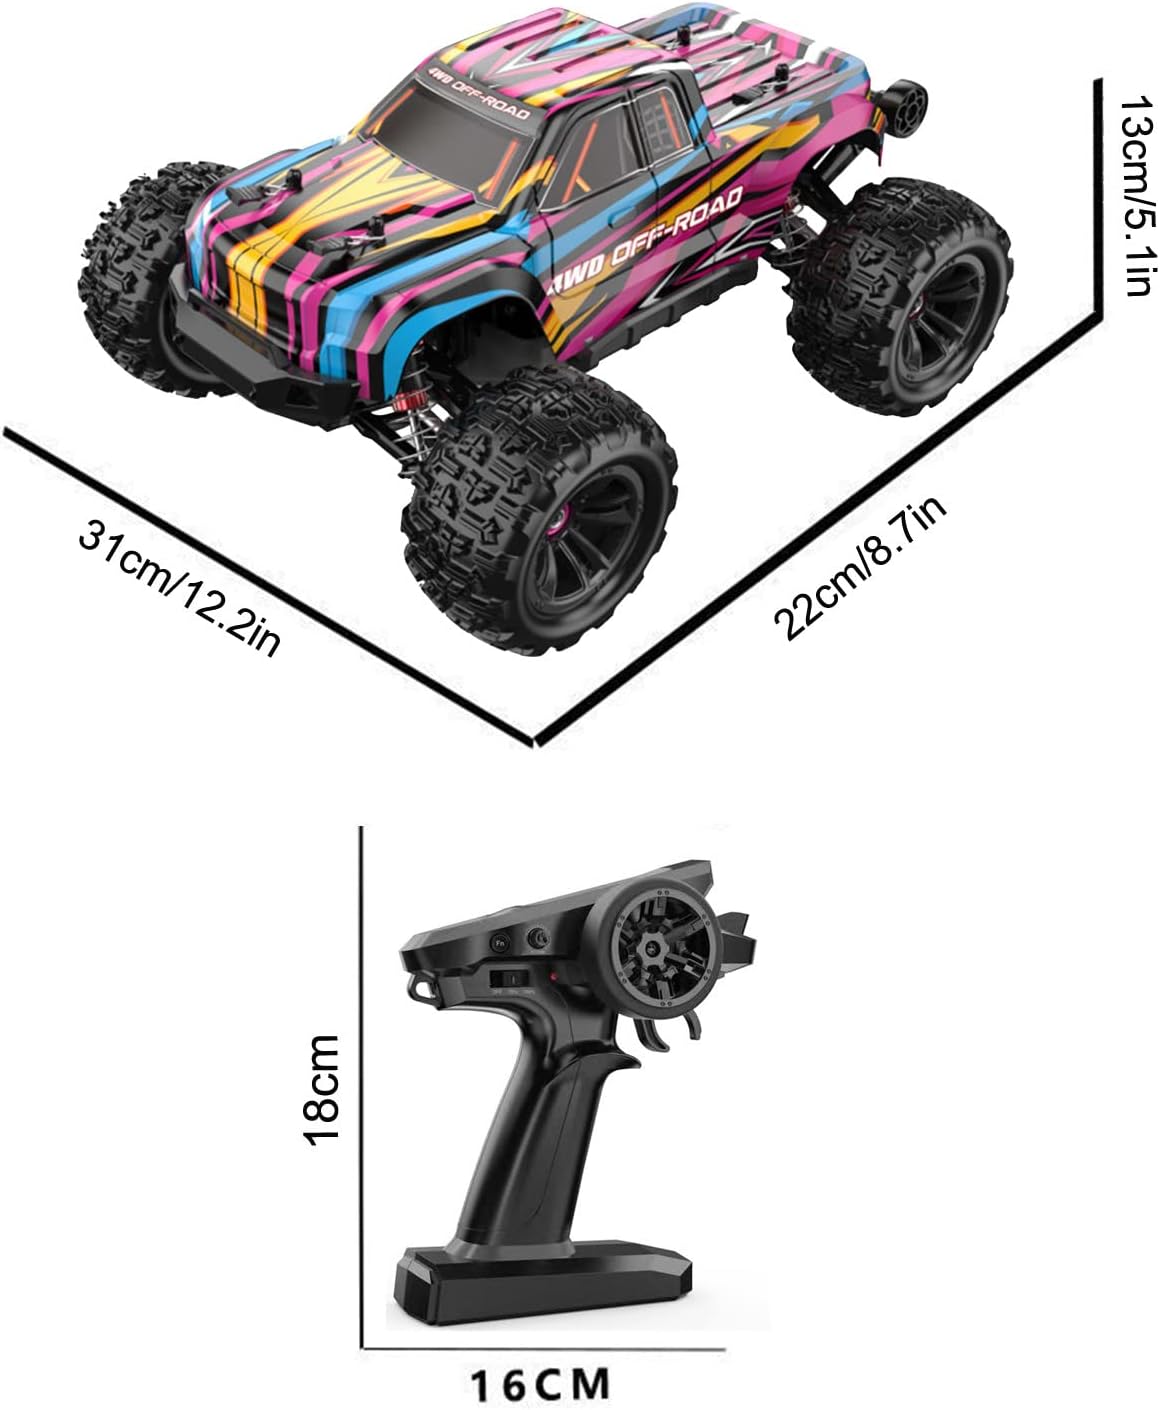 Hyper Go MJX 16209 1/16 Brushless RC 4WD High Speed Off-Road Buggy Truck